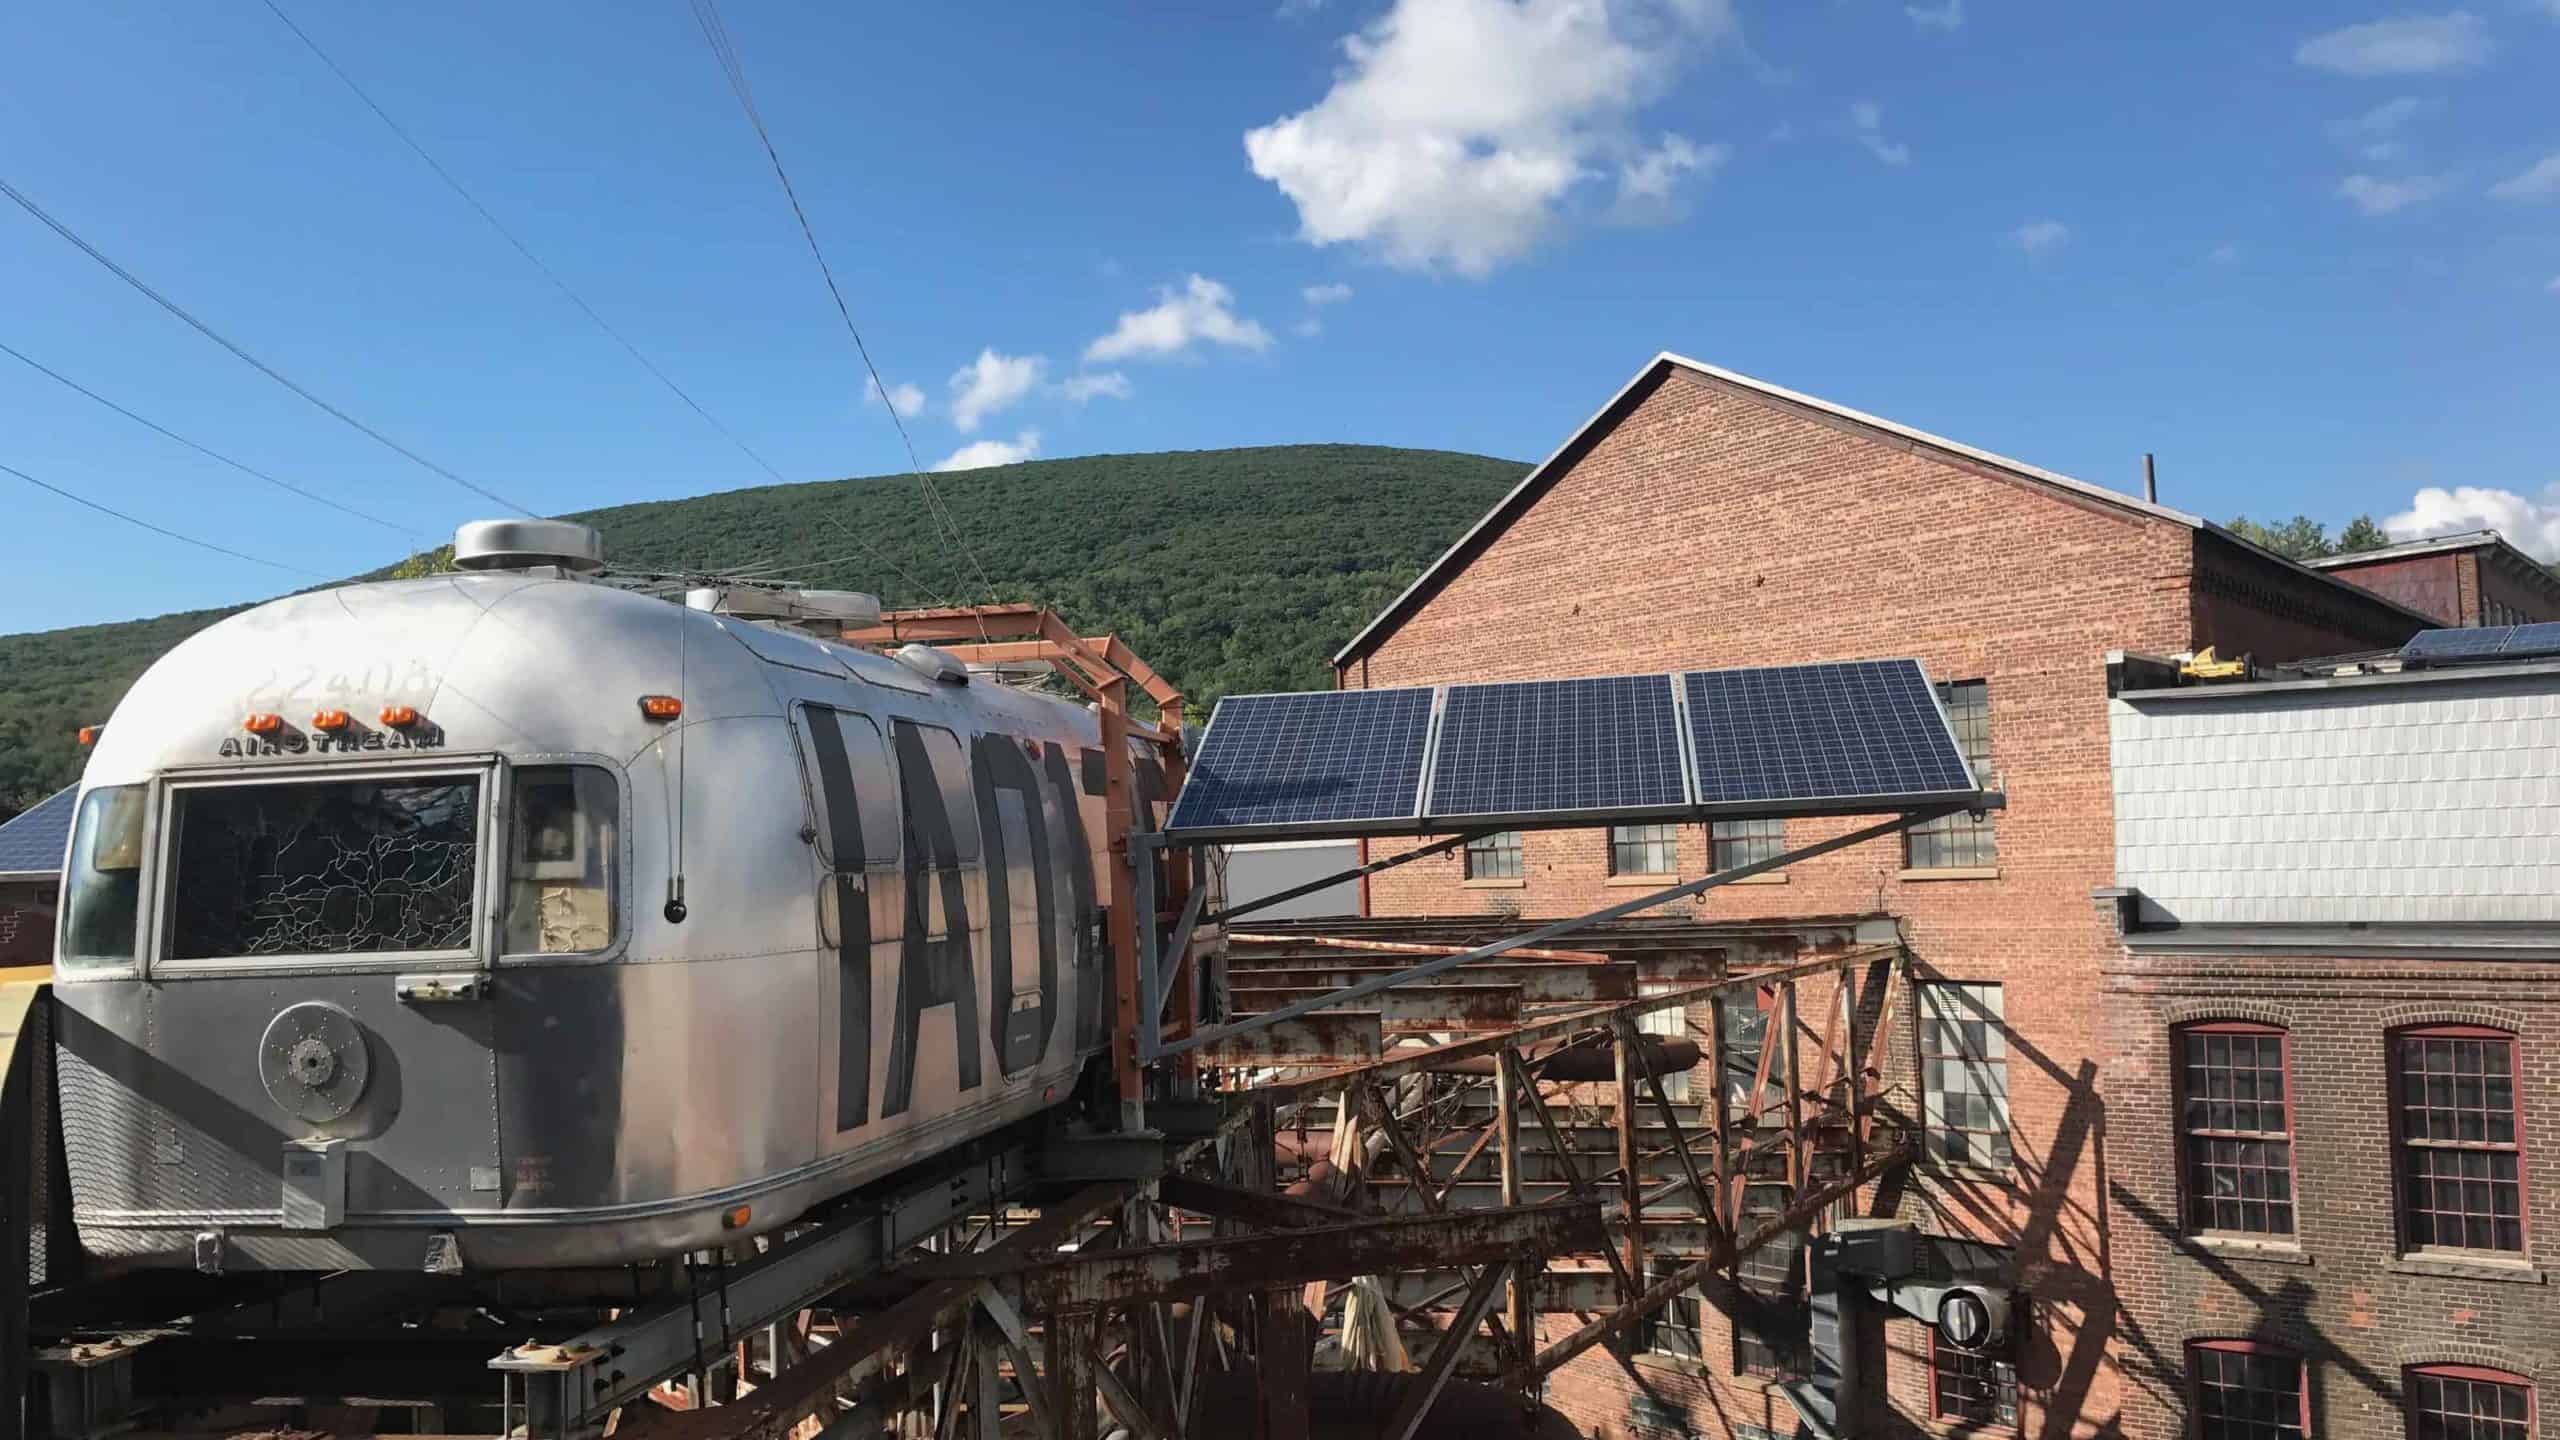 'The Shining,' Michael Oatman's silver Airstream vintage space ship, sits on the roof at Mass MoCA.